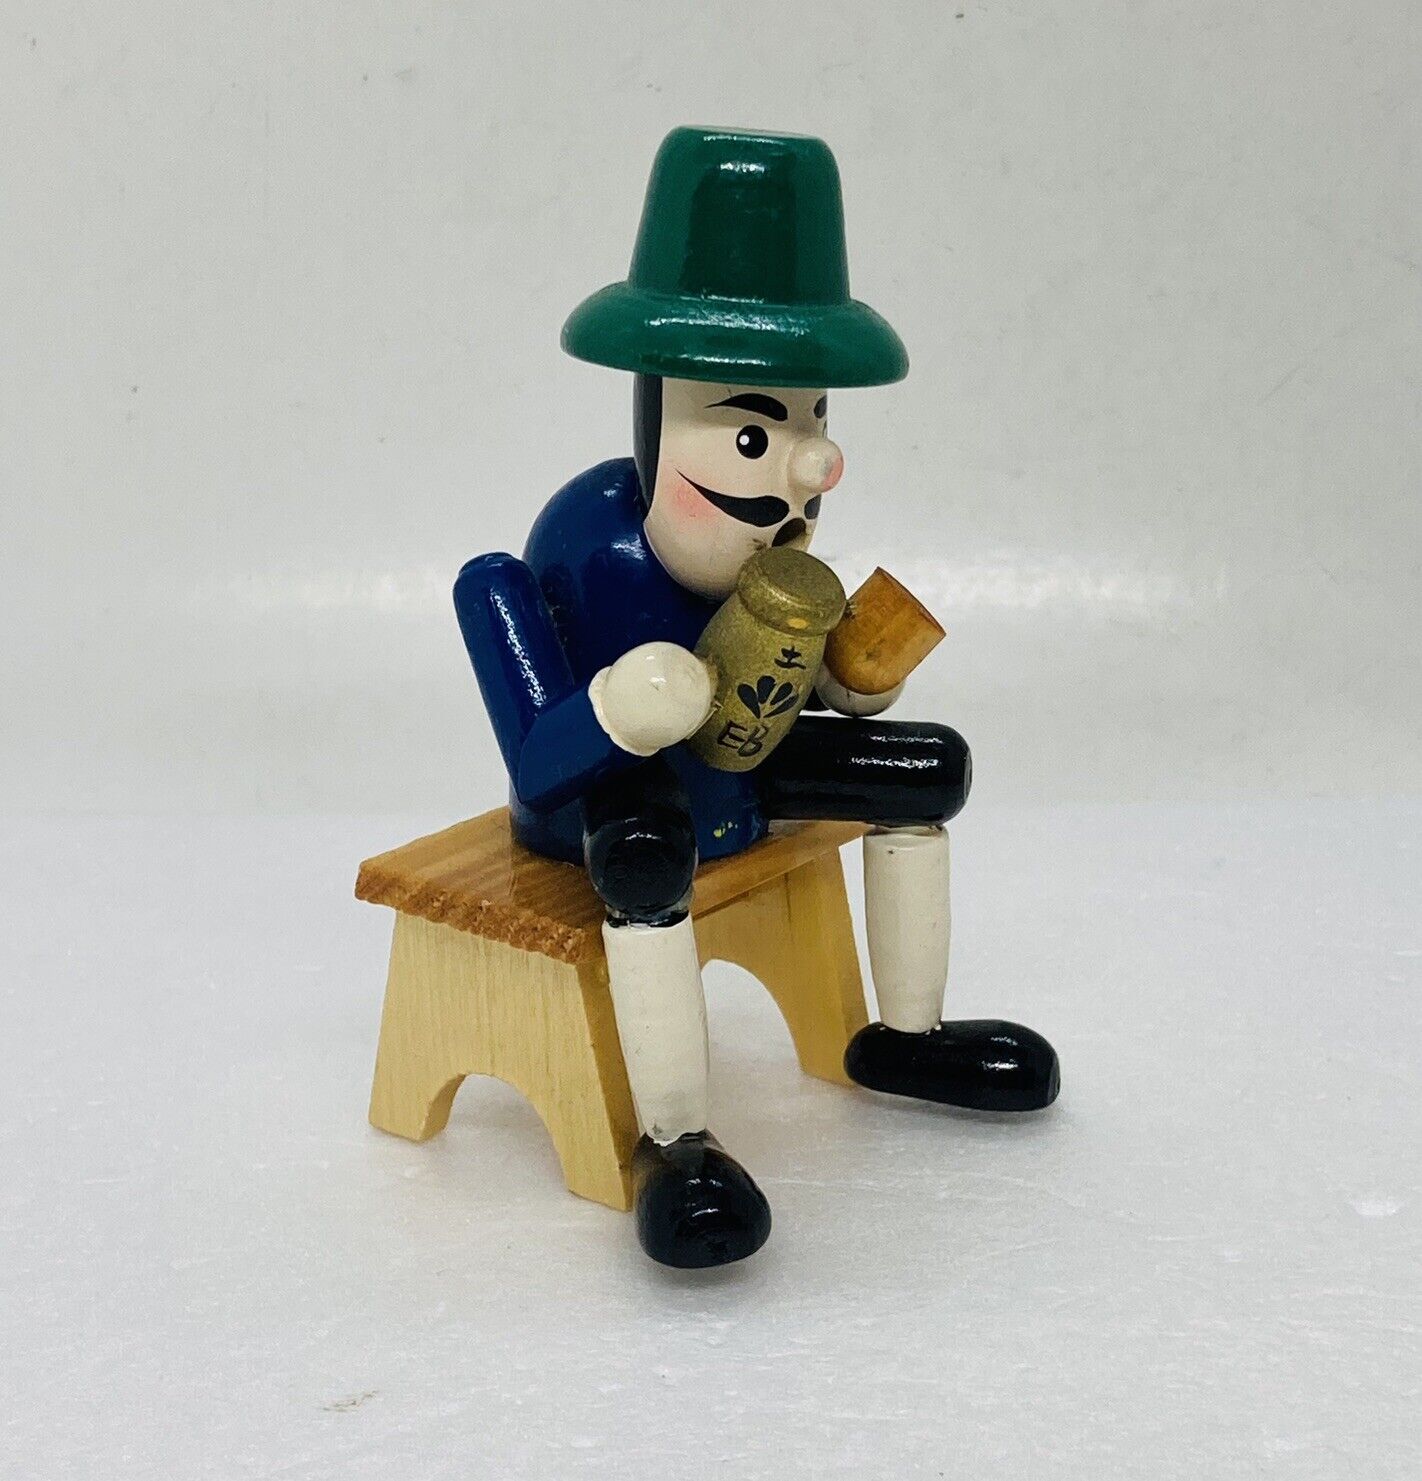 Vintage German Pipe Smoker On Chair Wooden Figurine Lacquered 4” Art Decor 23